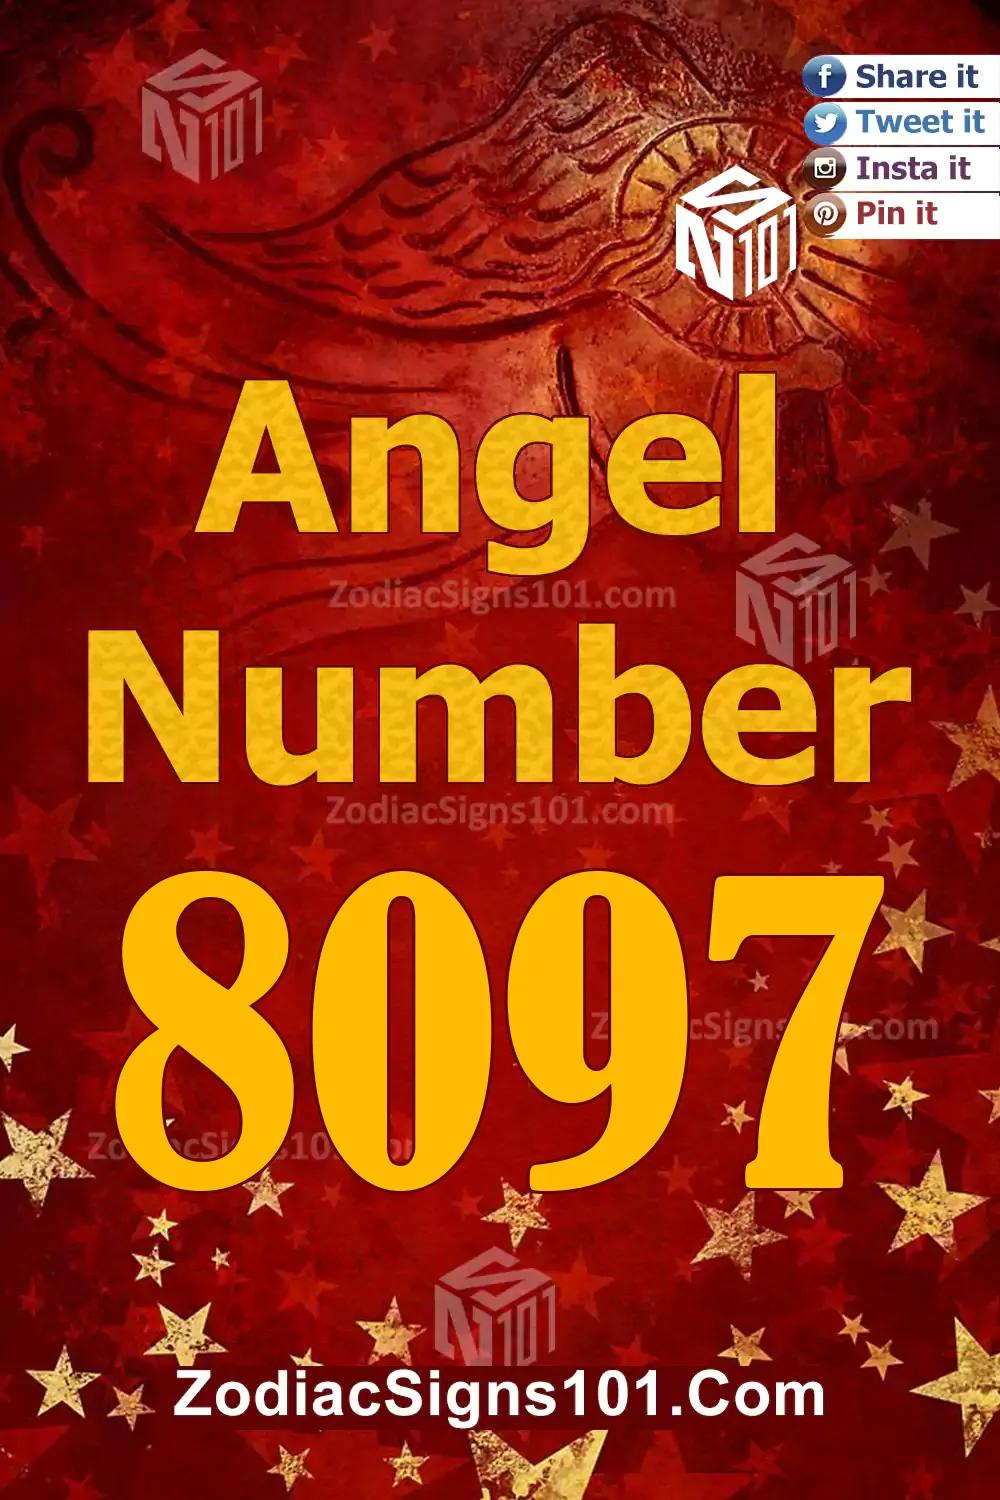 8097 Angel Number Meaning